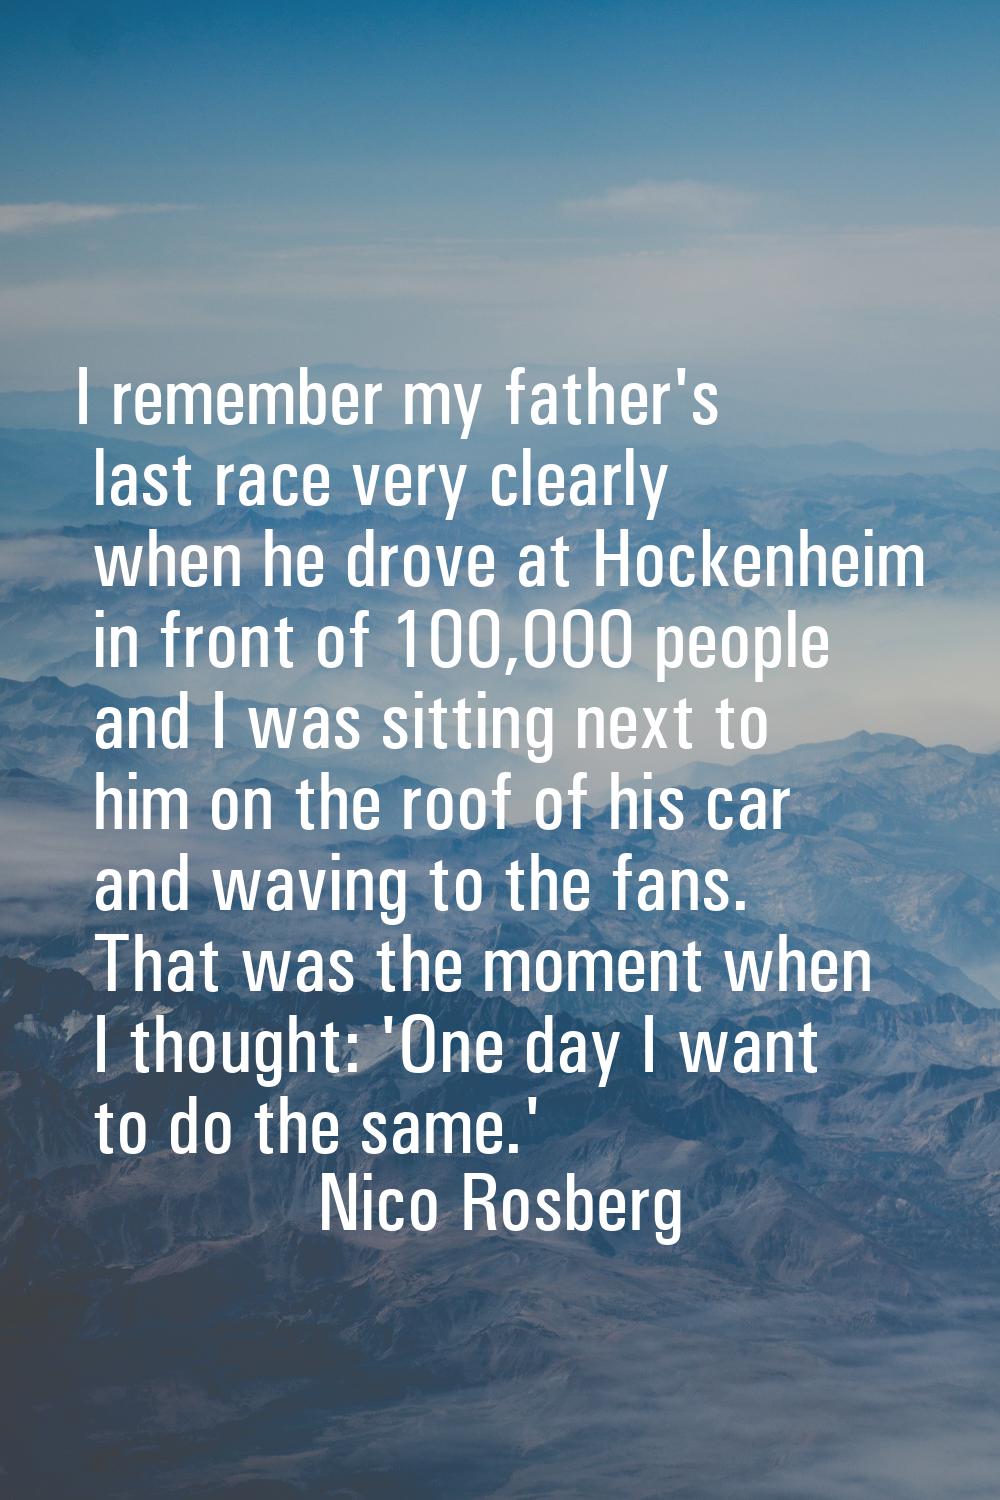 I remember my father's last race very clearly when he drove at Hockenheim in front of 100,000 peopl